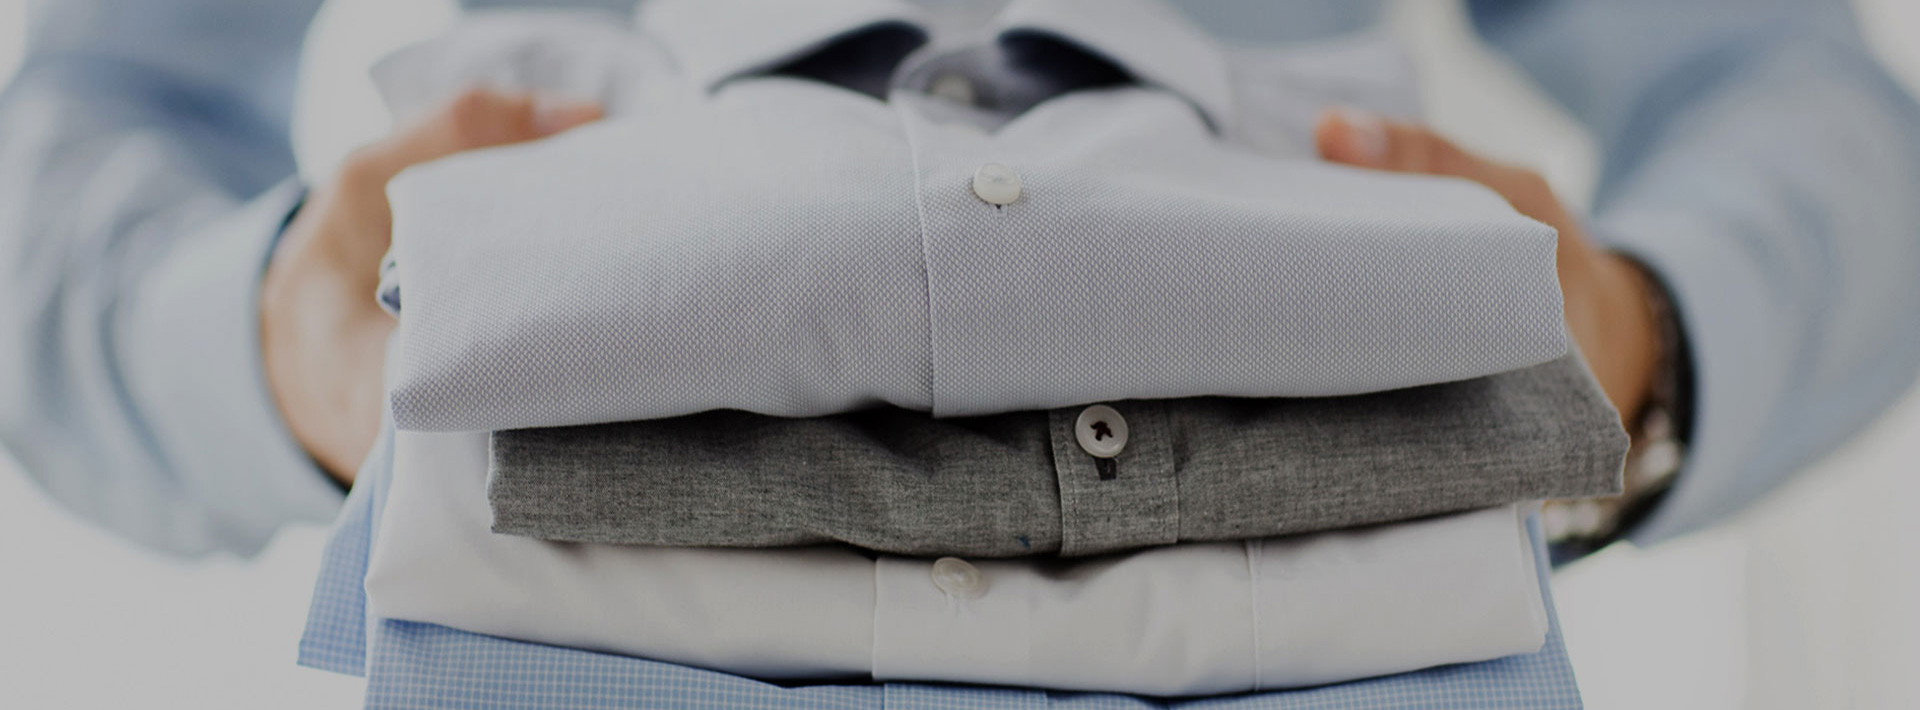 Shirt Dry Cleaning Services - Get Spotless Clothes Fast